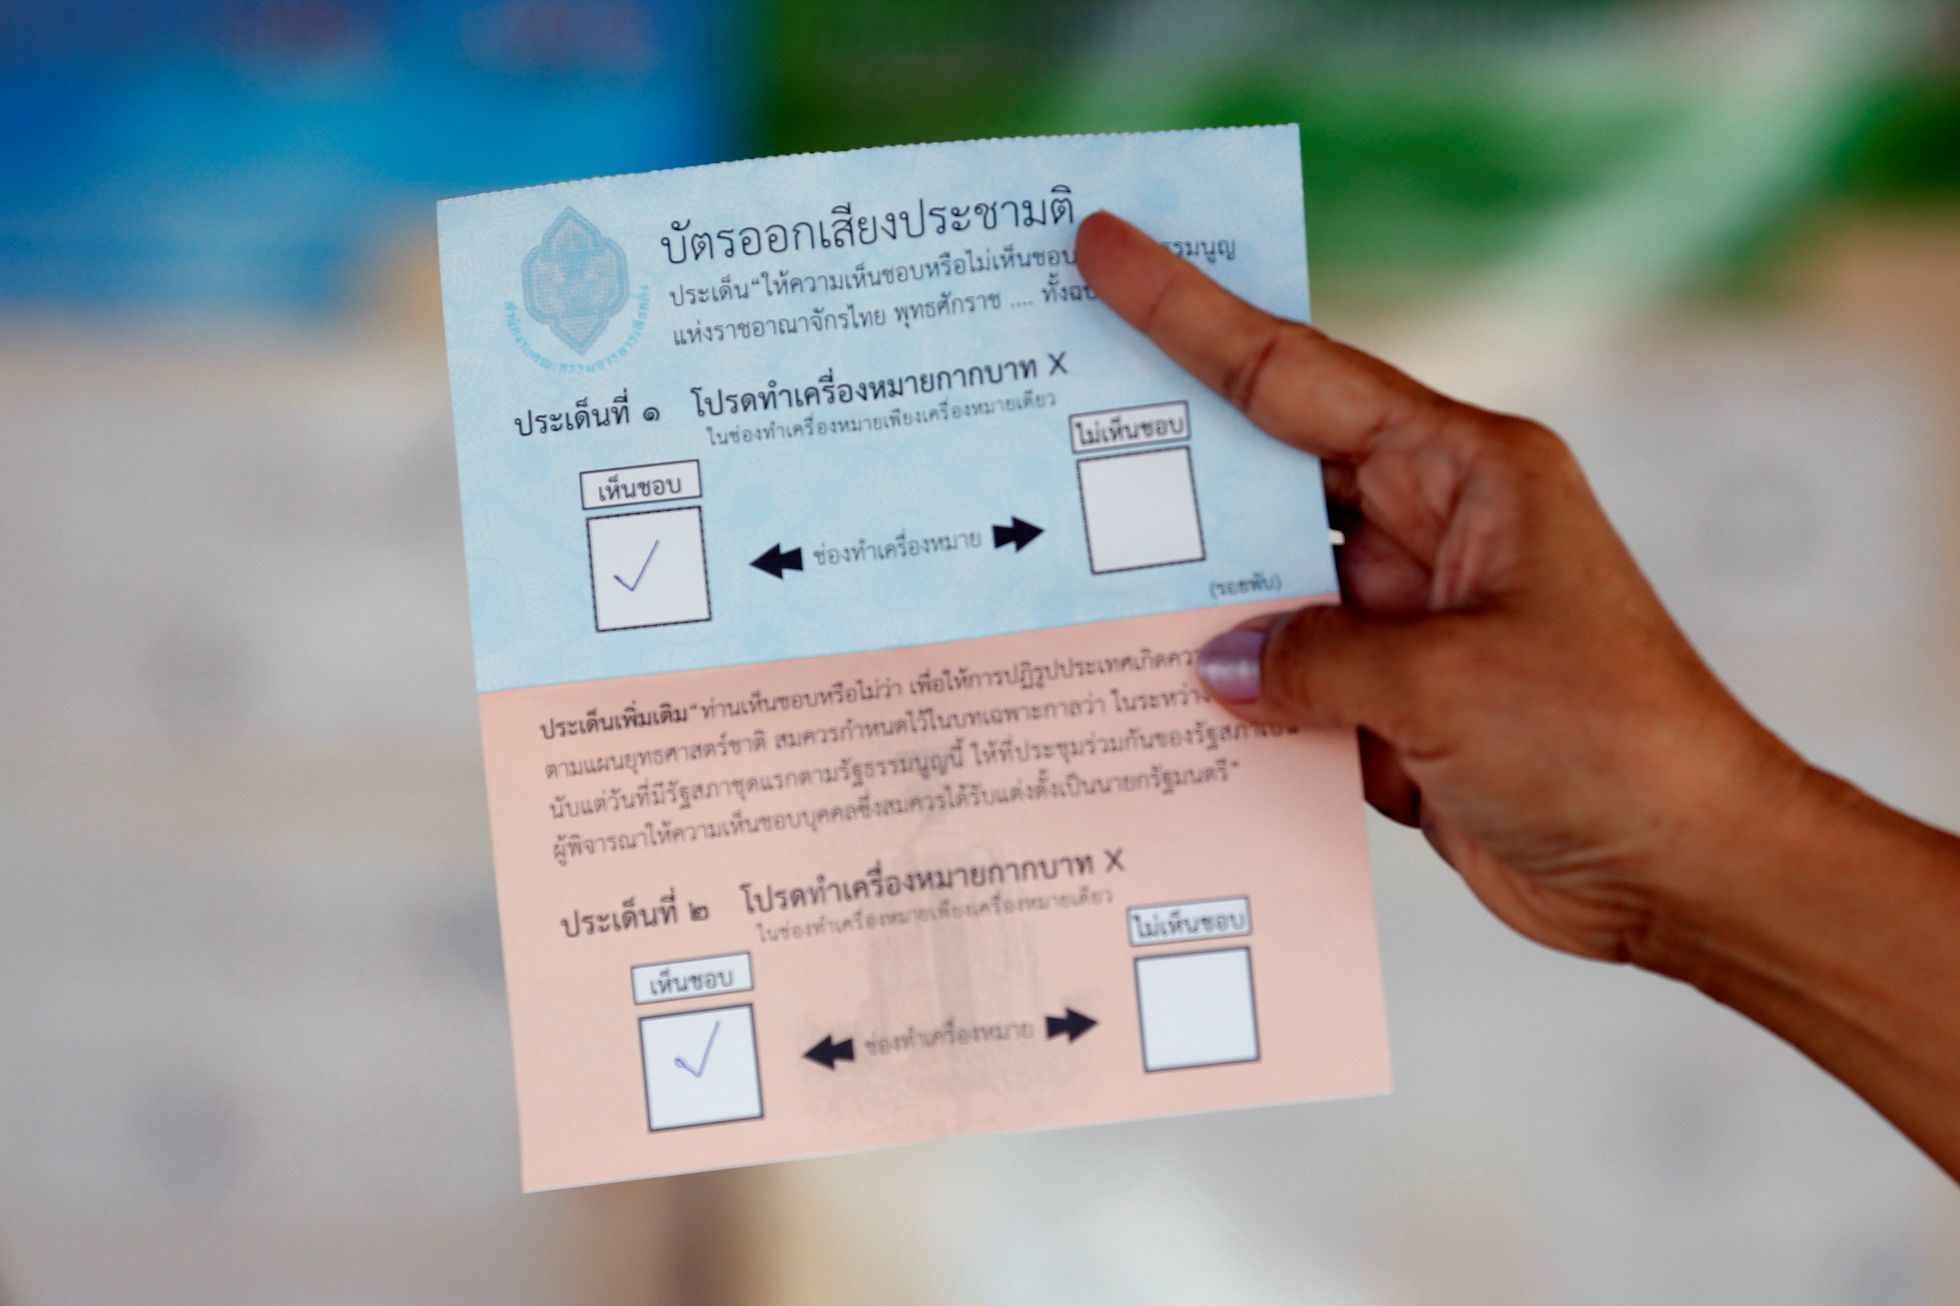 An election commission official displays a ballot paper to the media while counting votes during a constitutional referendum vote at a polling station in Bangkok